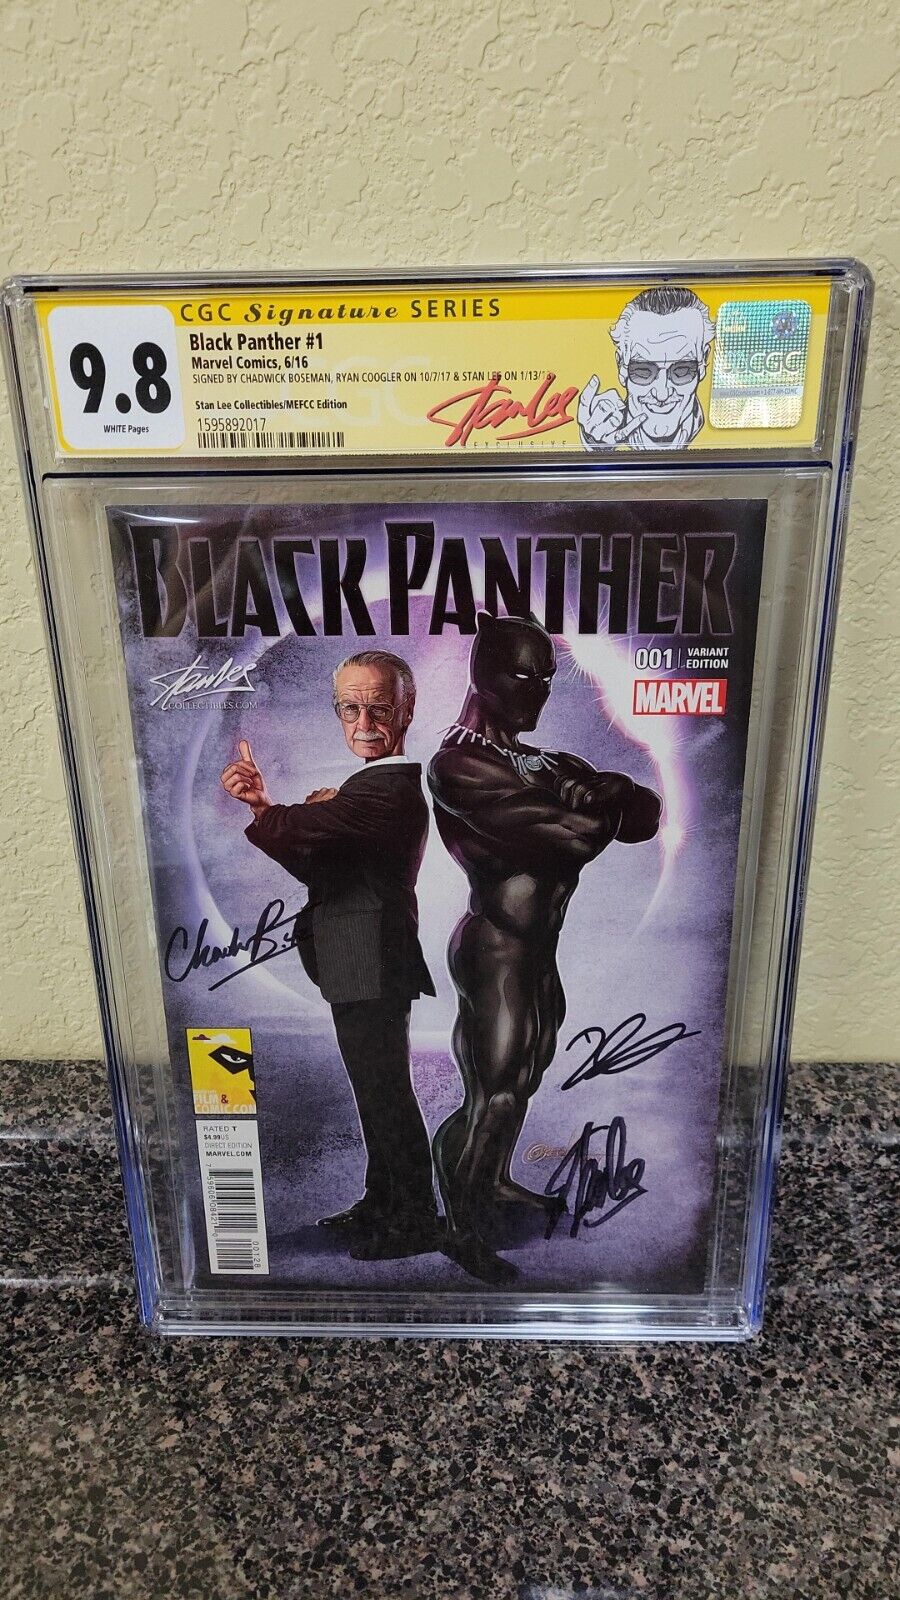 2016 MARVEL COMIC BLACK PANTHER #1 HORN VARIANT SIGNED STAN LEE CHADWICK BOSEMAN